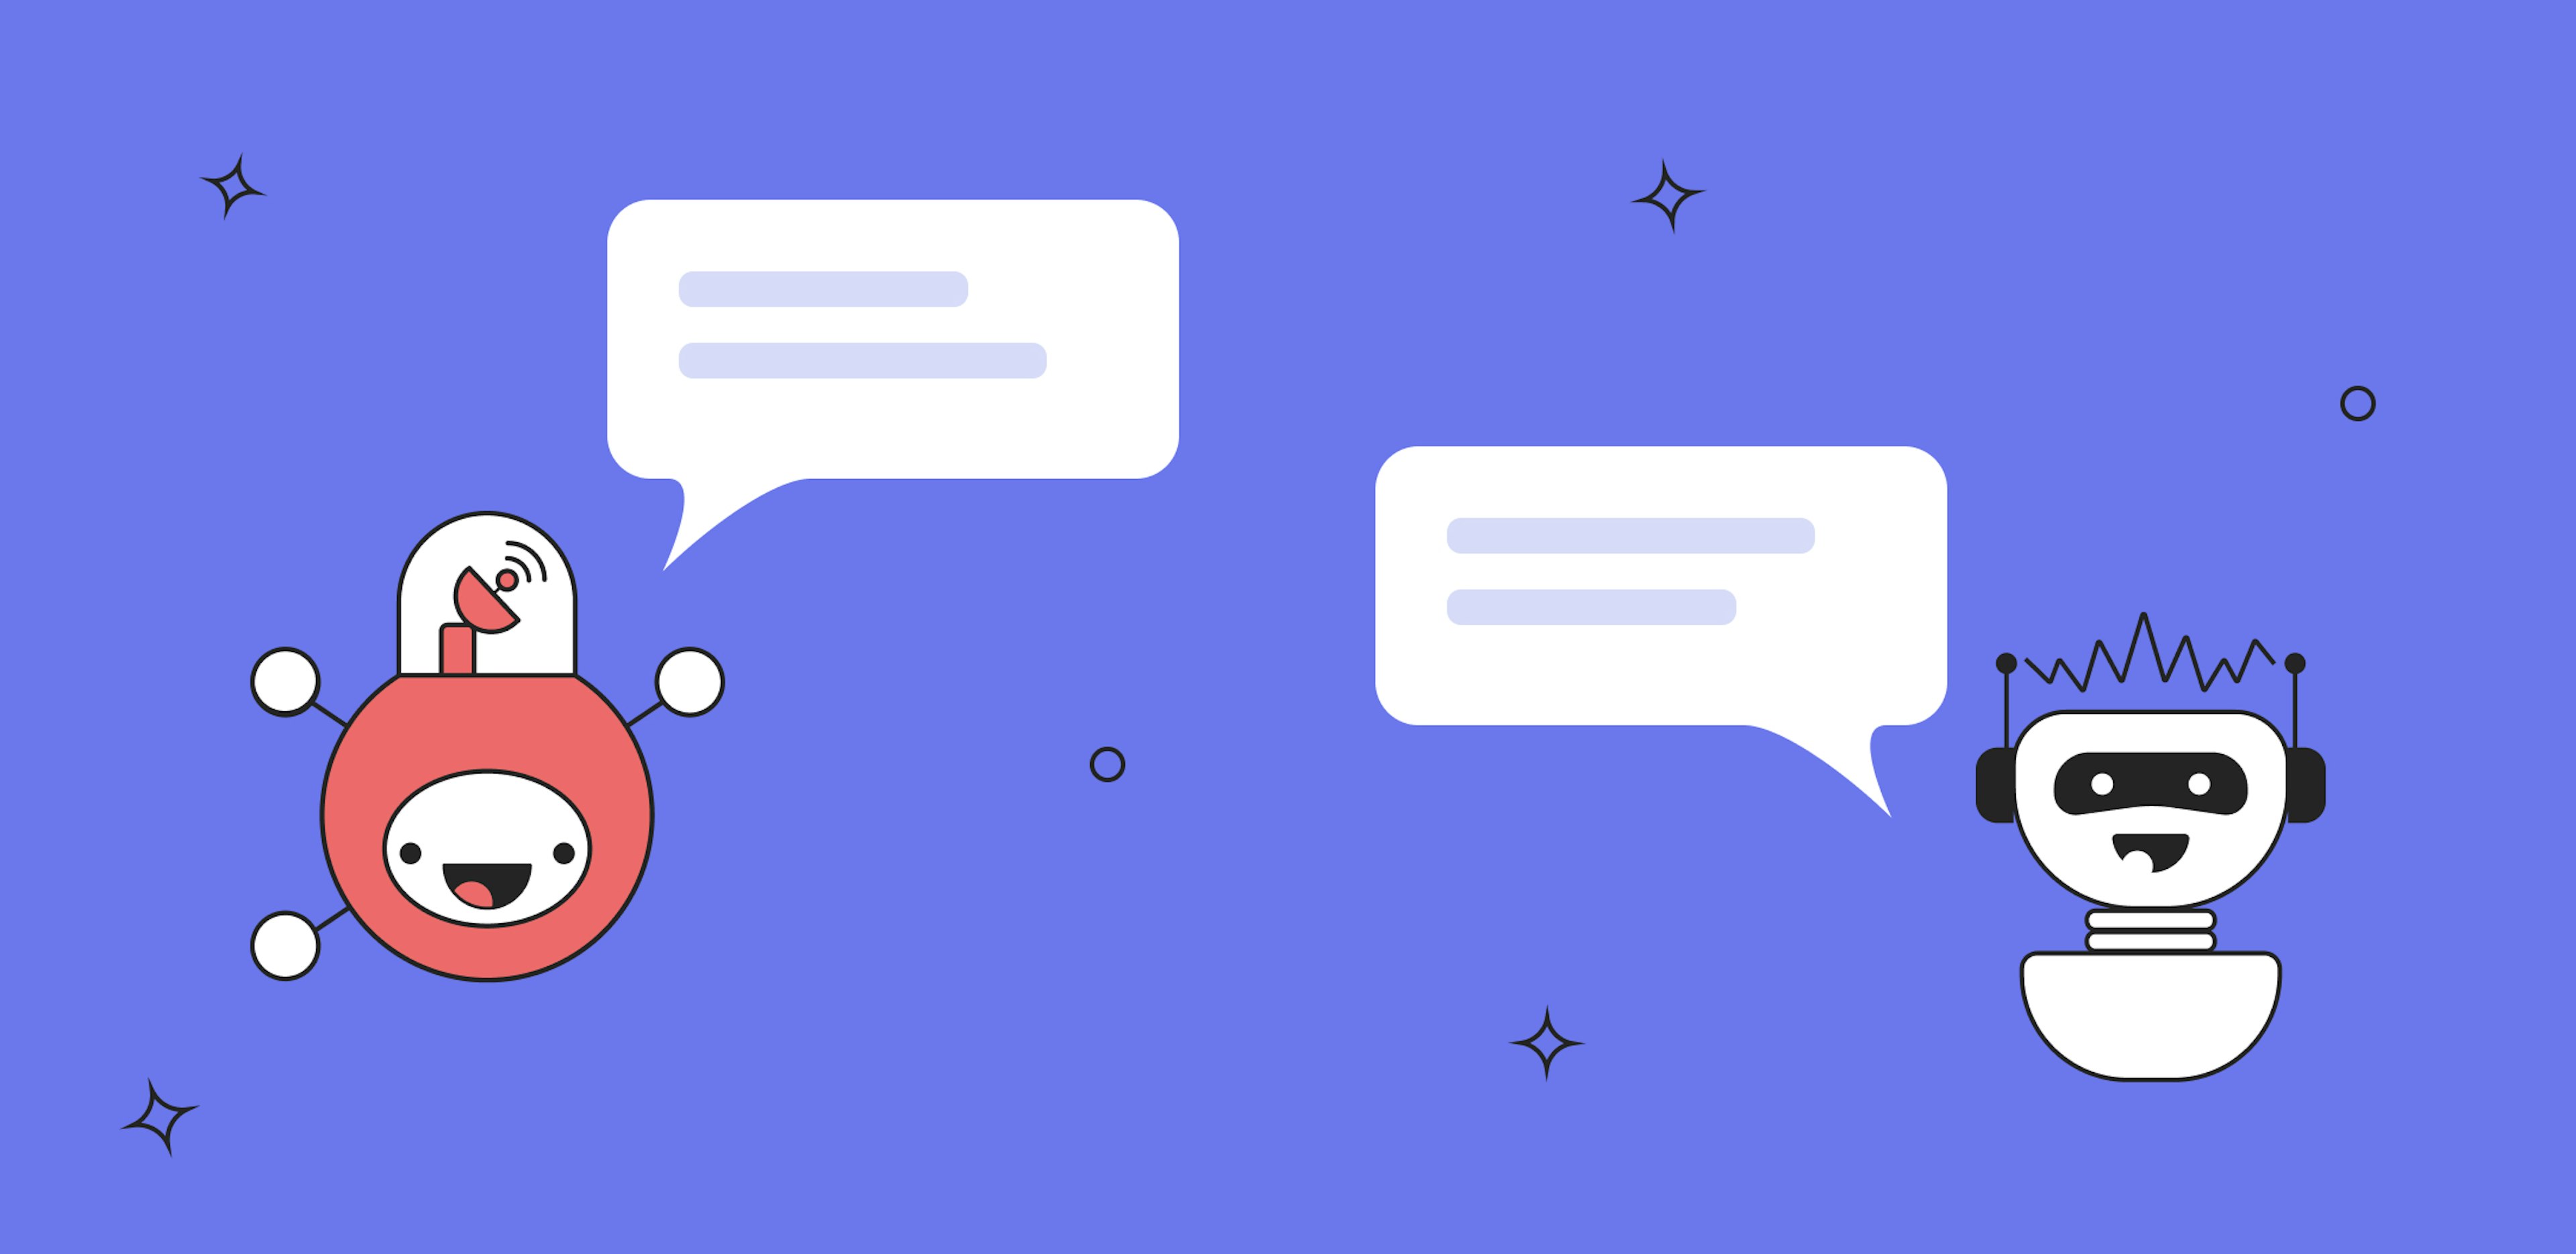 Introducing direct messenger feature on WorksHub 💬